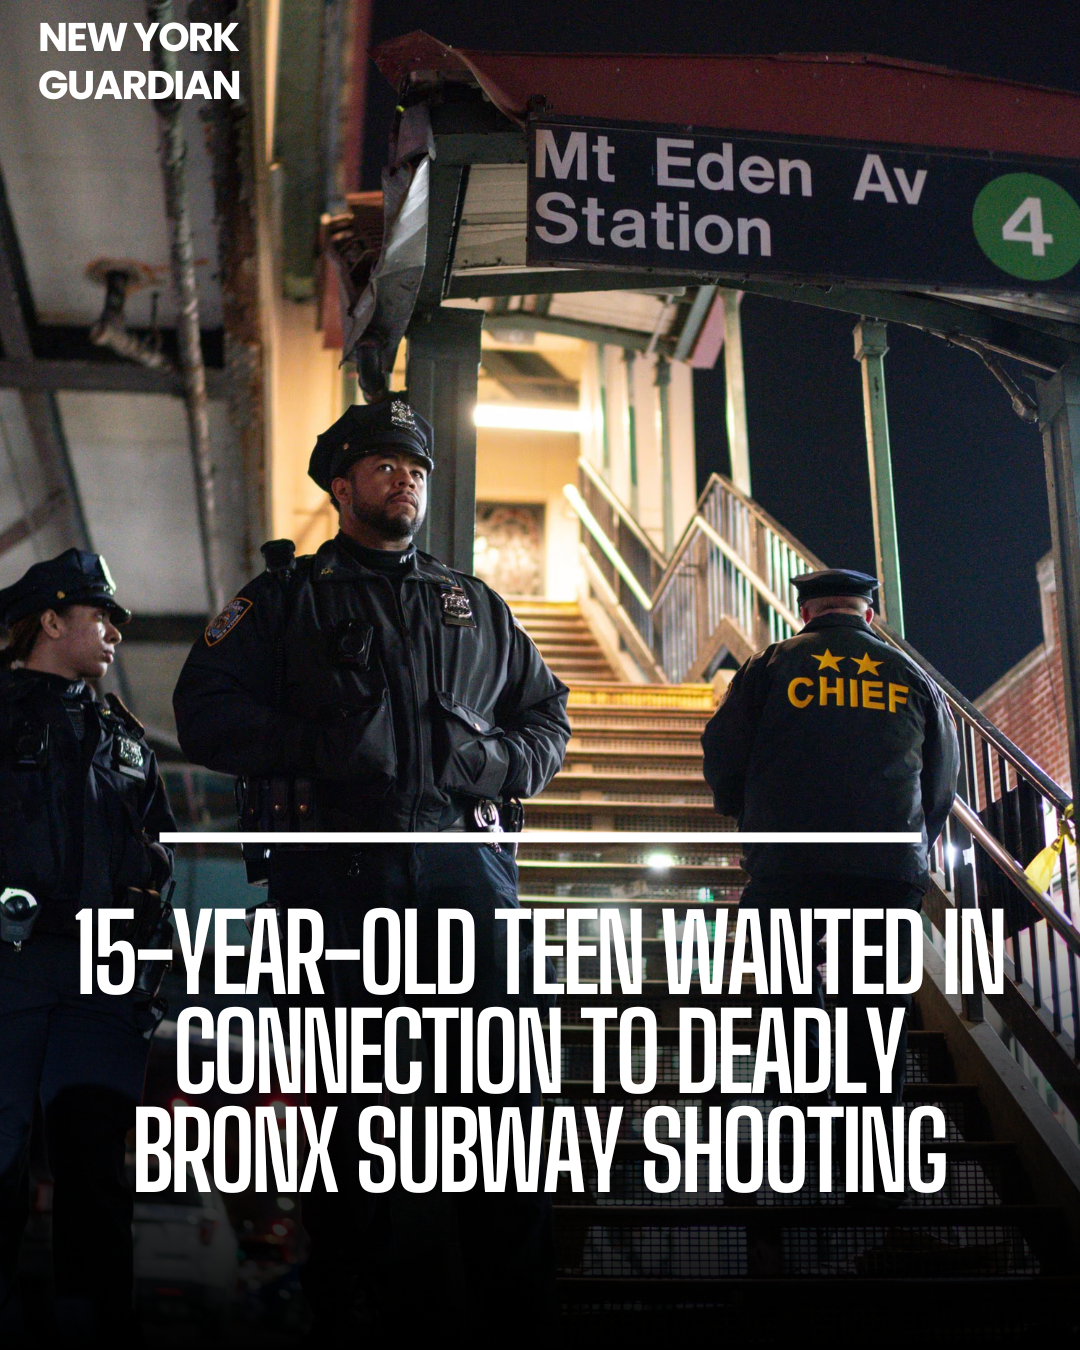 Following a horrific shooting at a Bronx tube station, investigators are stepping up their search for suspects.